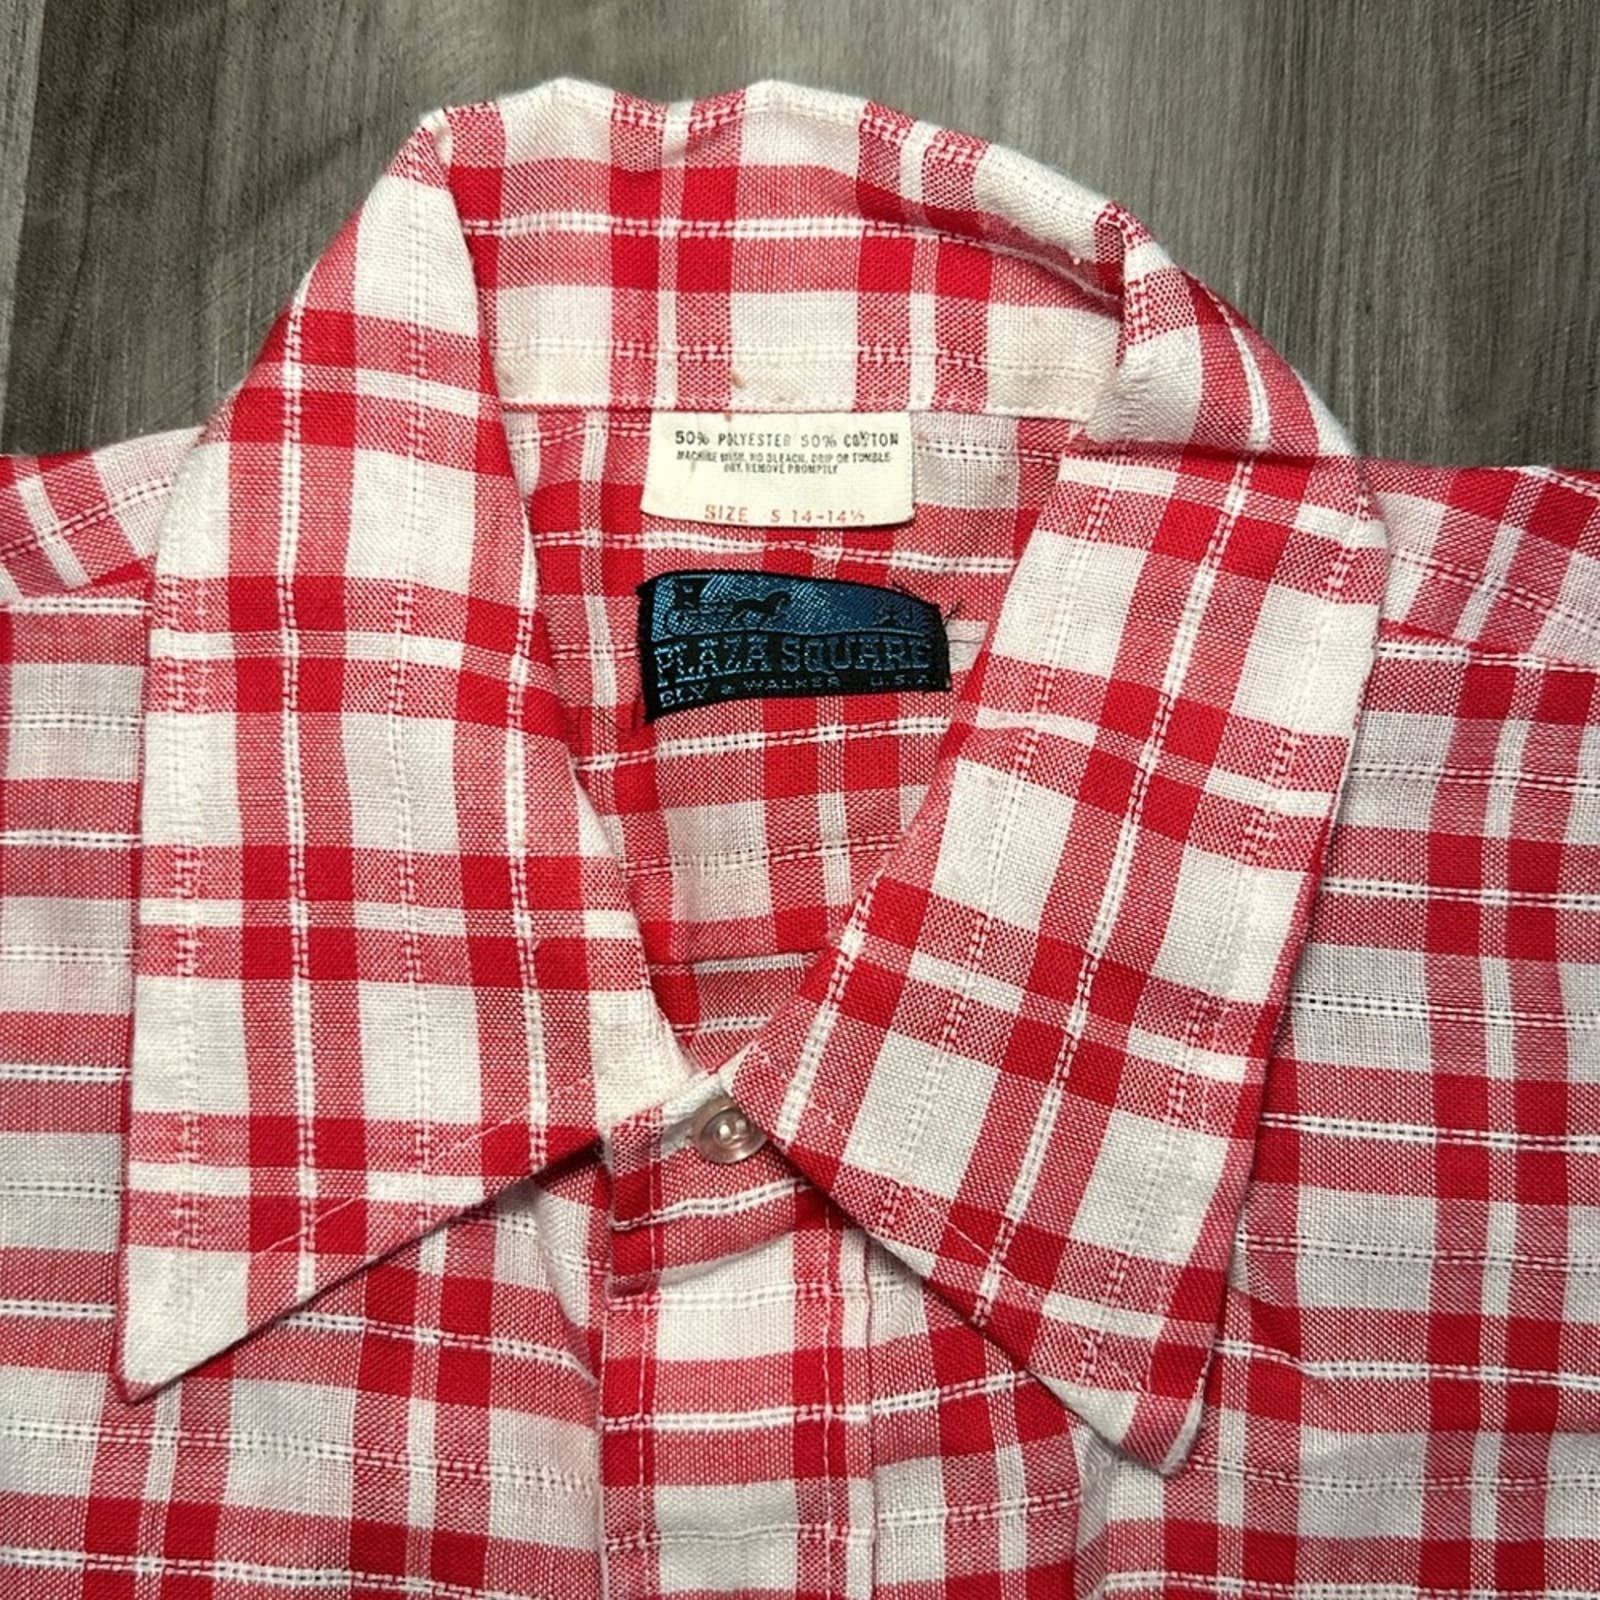 1 Plaza Square by Ely and Walker Western Short Sleeve Size US S / EU 44-46 / 1 - 6 Preview